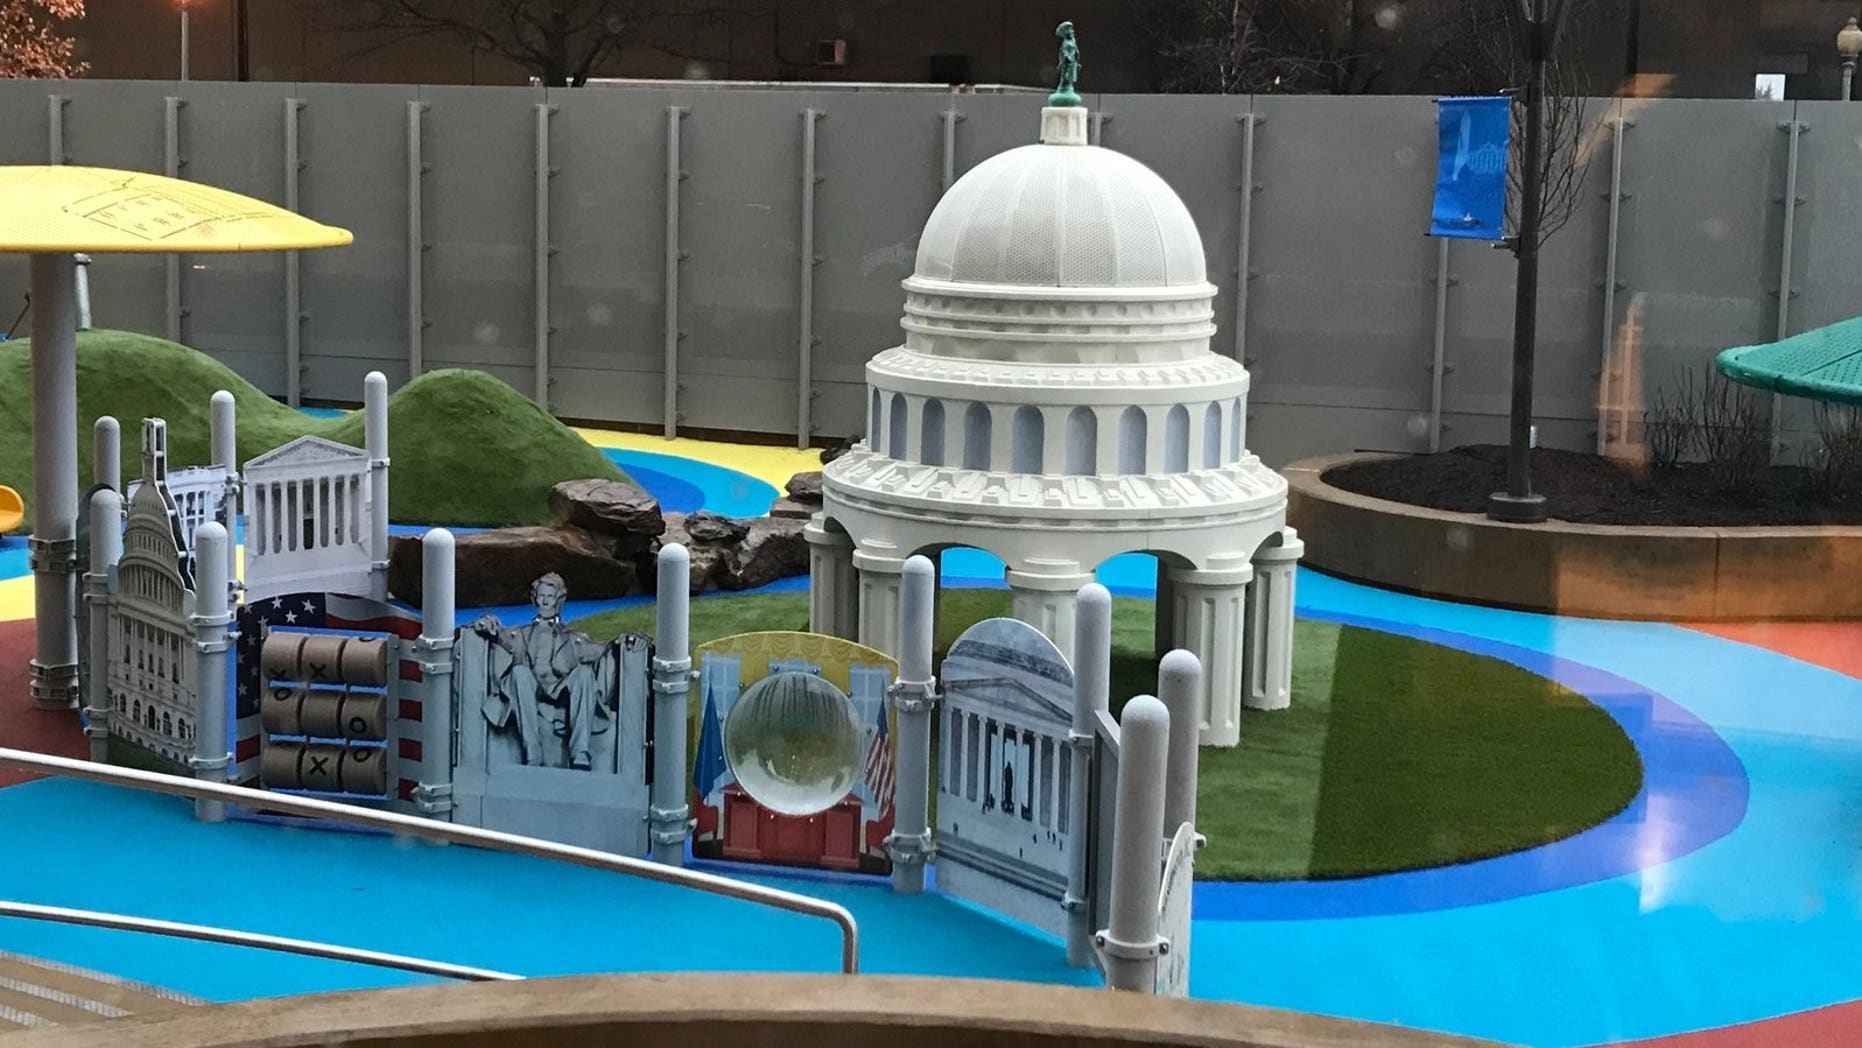 Congressional day care center with miniature National Mall to open, with $12 million taxpayer-funded outlay